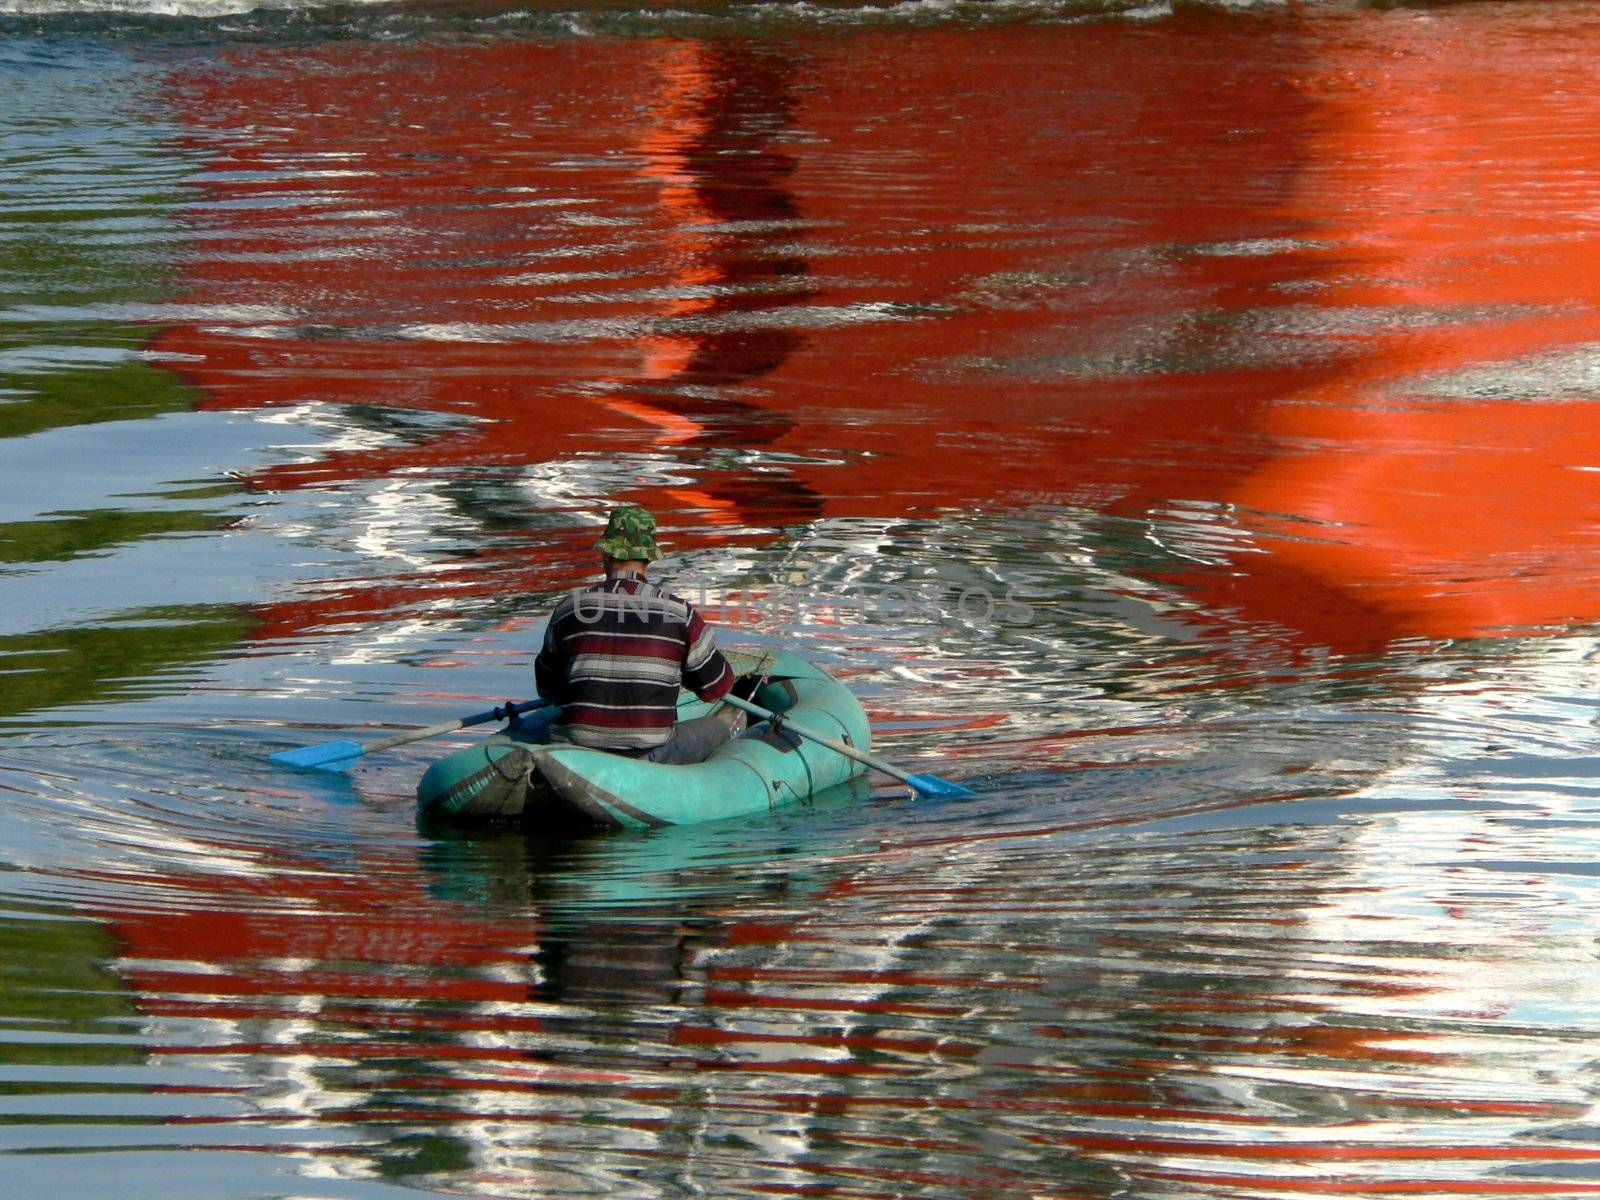 The Colorful reflection on water and fisherman in boat.